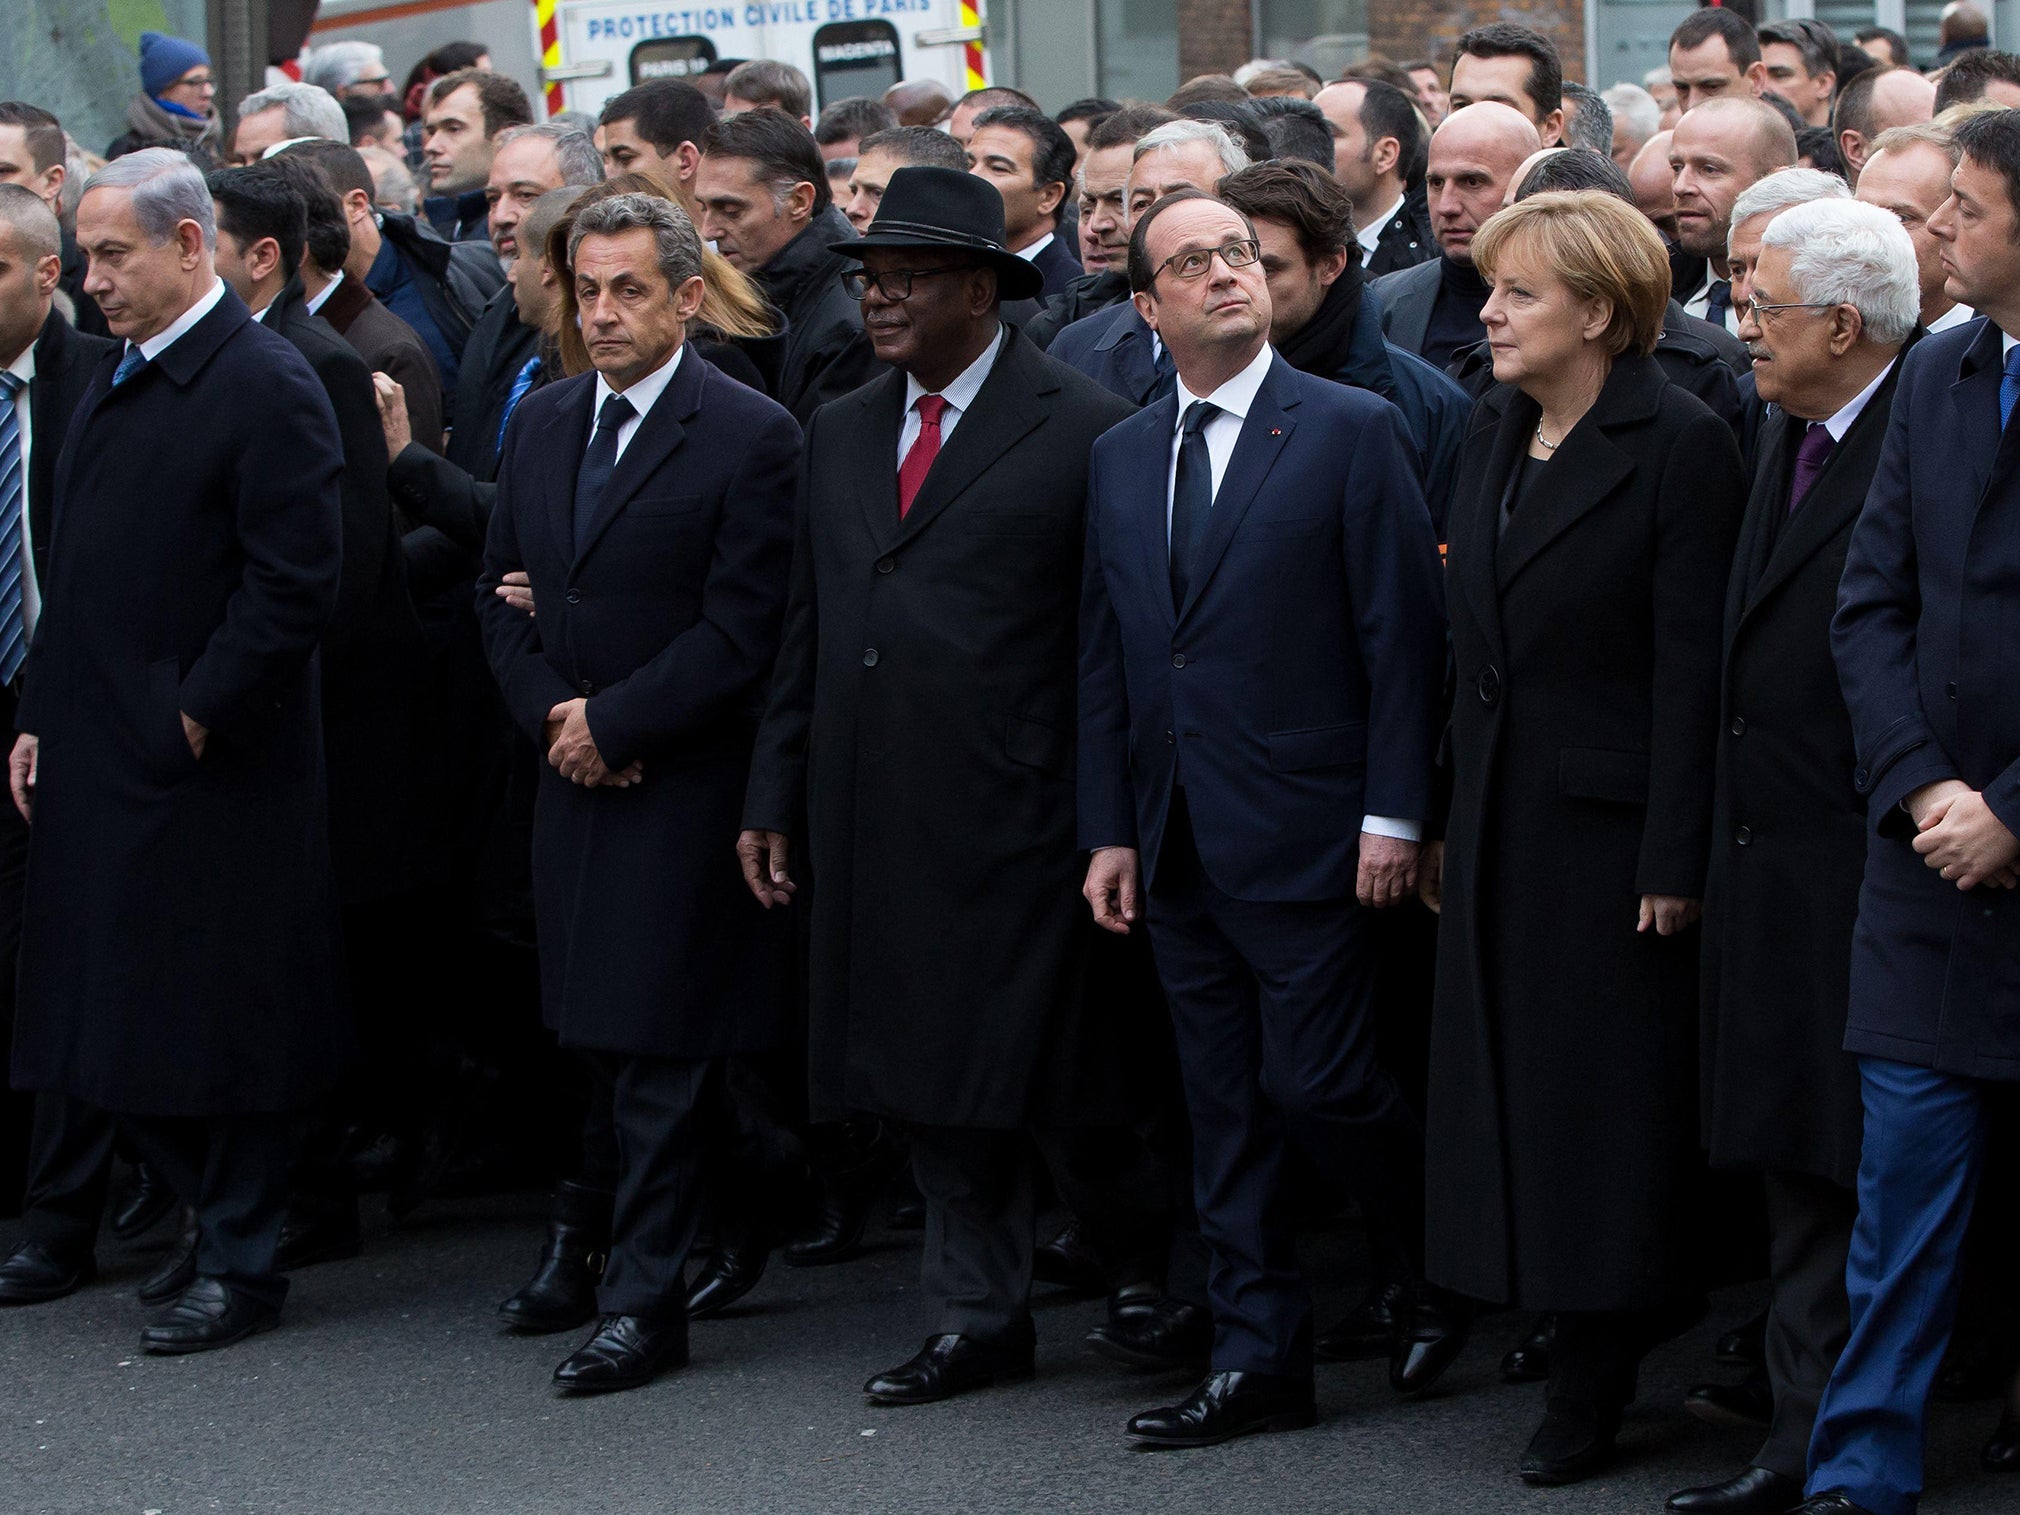 Former President Nicolas Sarkozy appeared to push his way to the front row of the Charlie Hebdo Paris rally